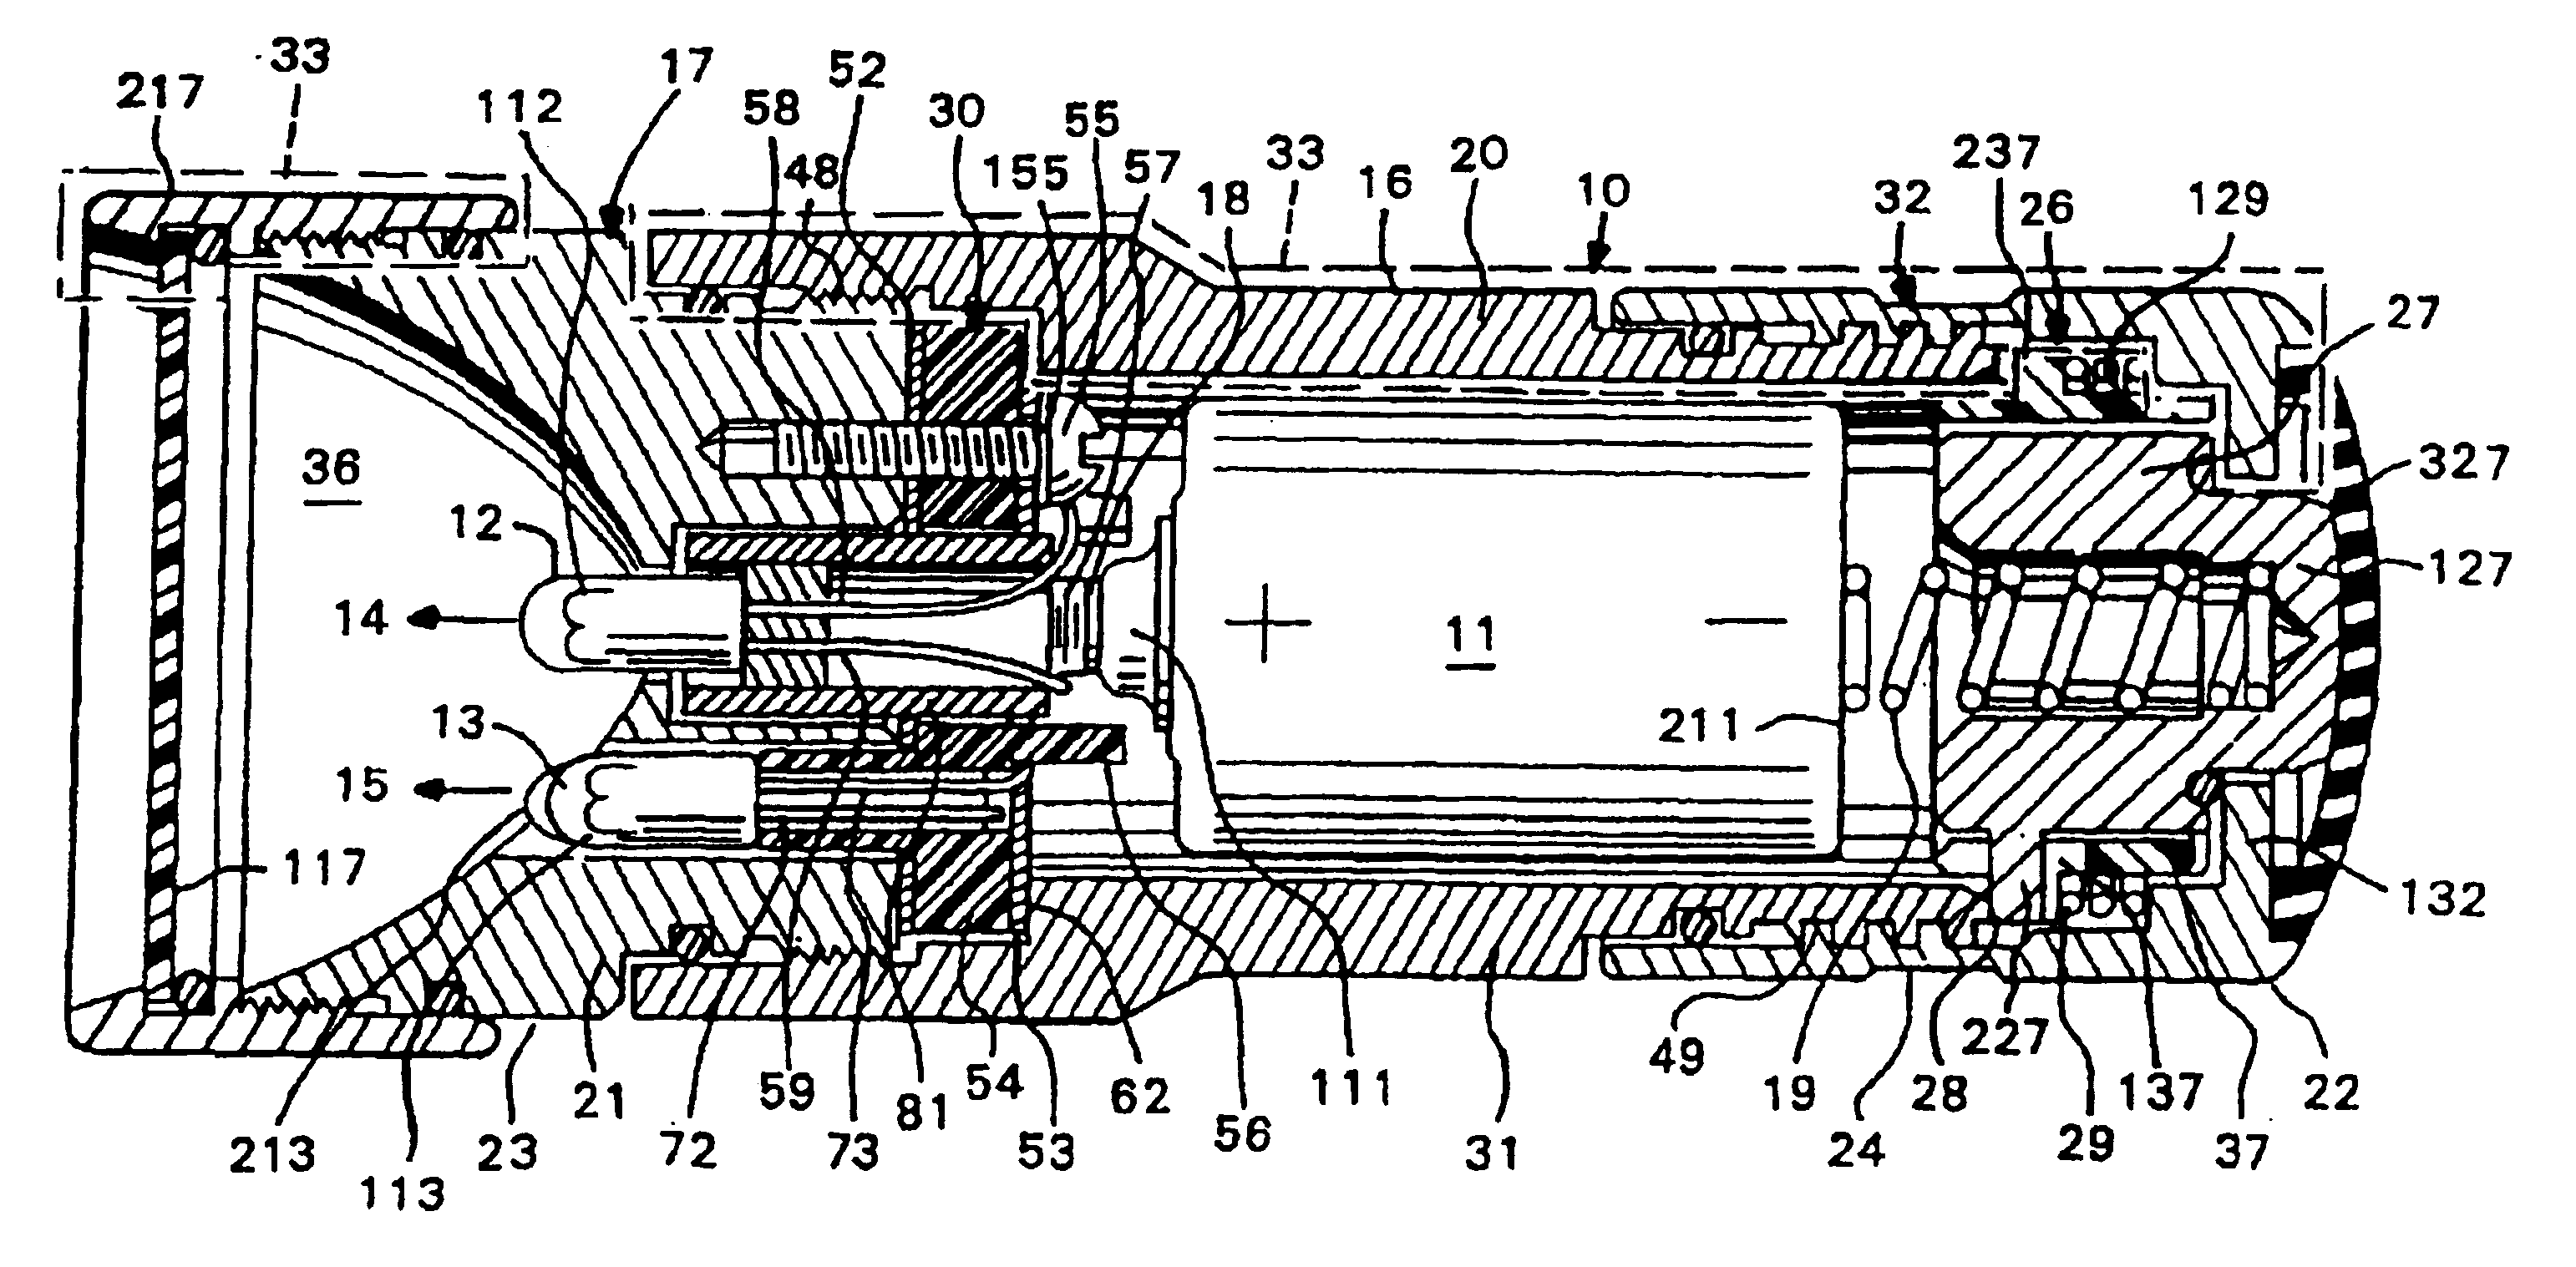 Flashlights and other battery-powered apparatus for holding and energizing transducers